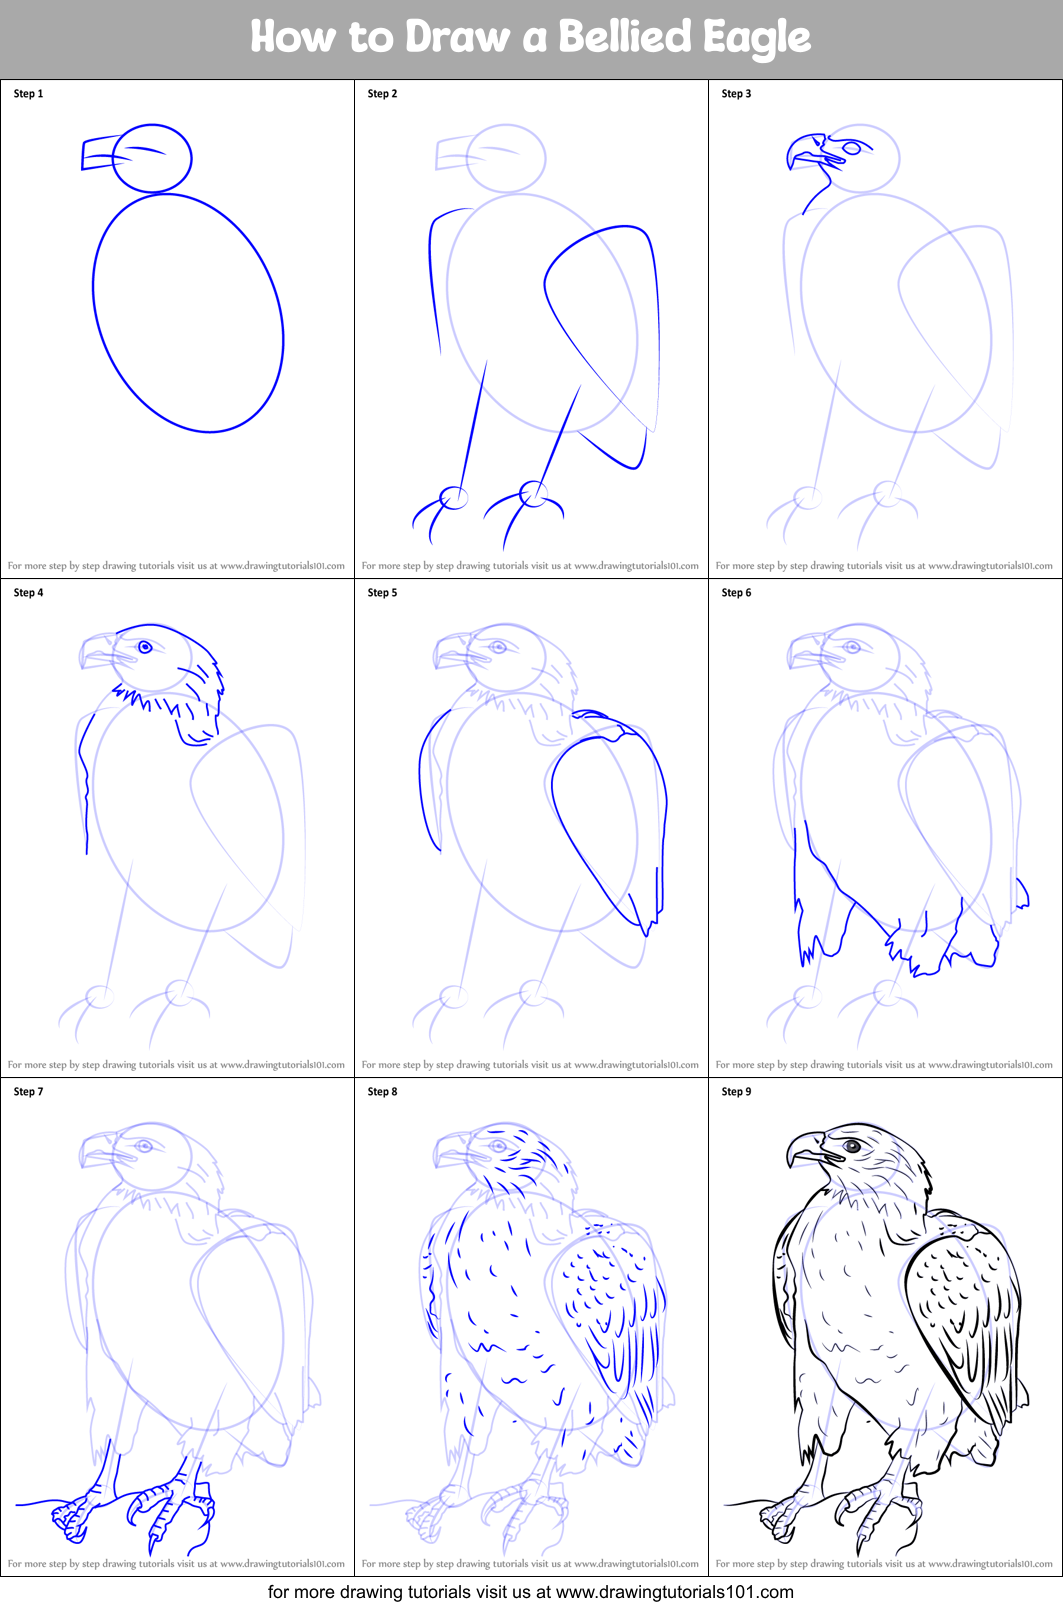 How to Draw a Bellied Eagle printable step by step drawing